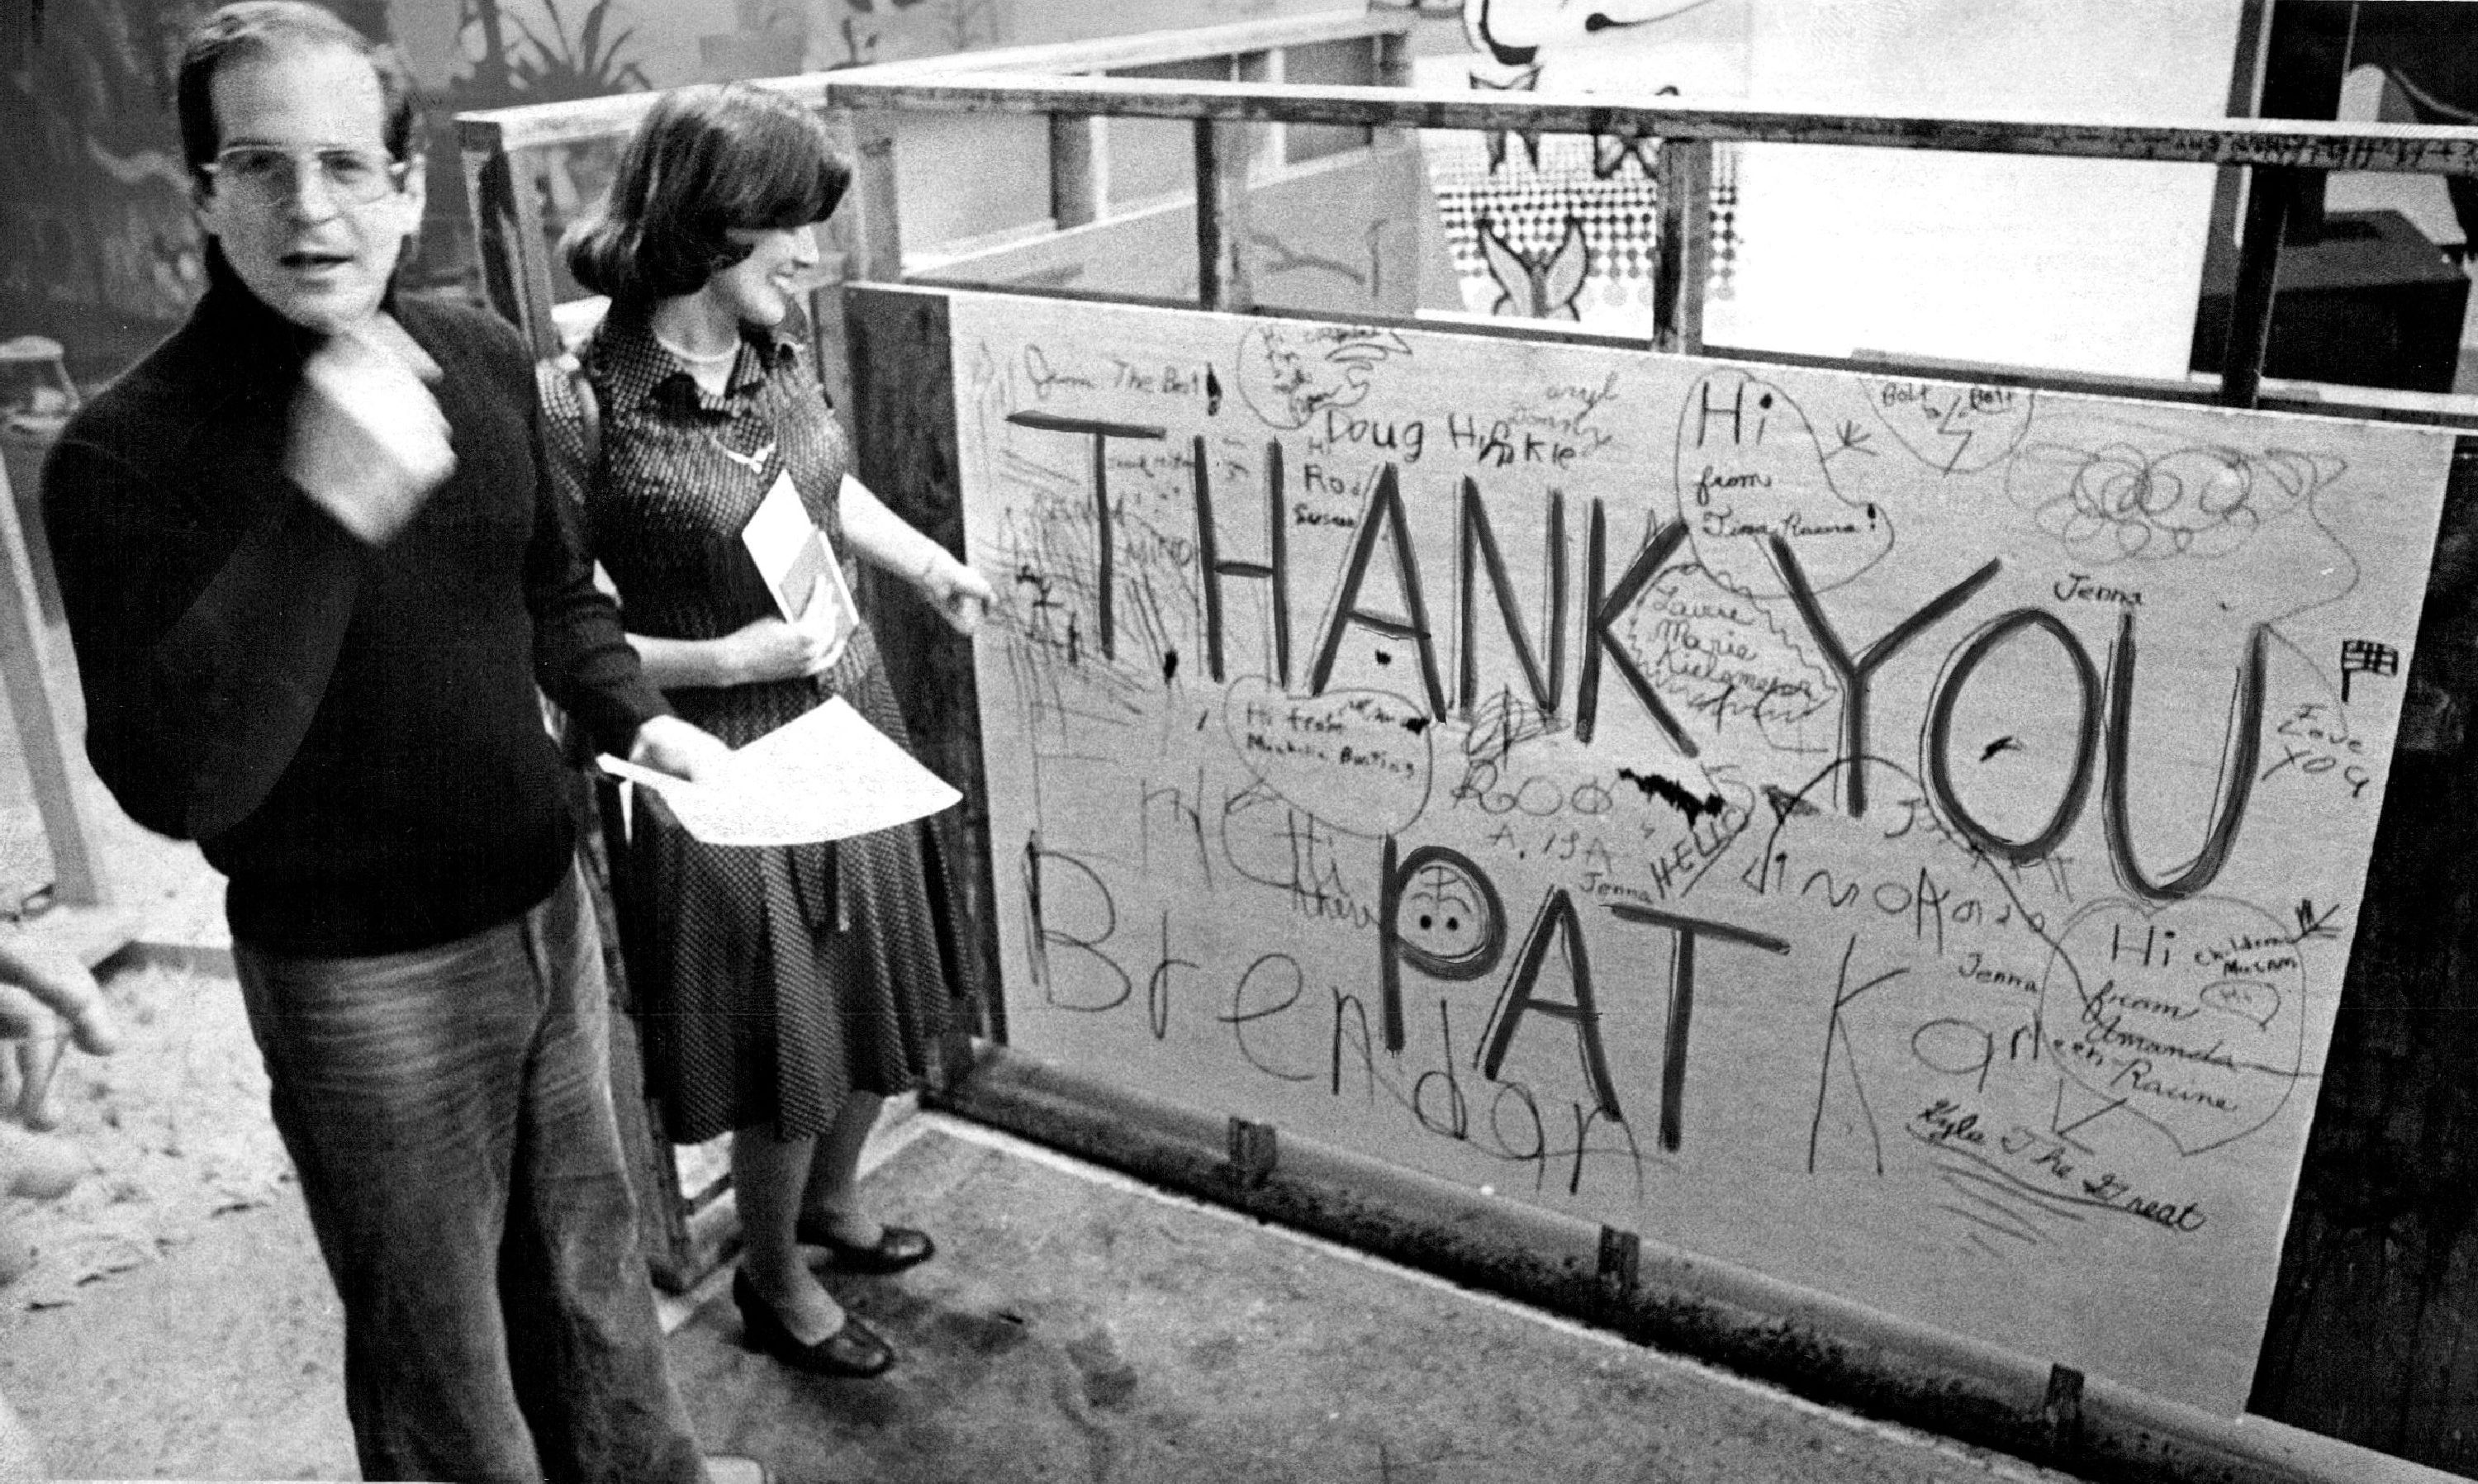 APR 12 1977, APR 13 1977; GIANT THANK-YOU CARD GIVEN TO REP. PAT SCHROEDER, D-COLO.; Dr. Richard Steckel, director of the Children's Museum, accepted a $5,000 donation, which will help the museum survive.; (Photo By Kenn Bisio/The Denver Post via Getty Images)